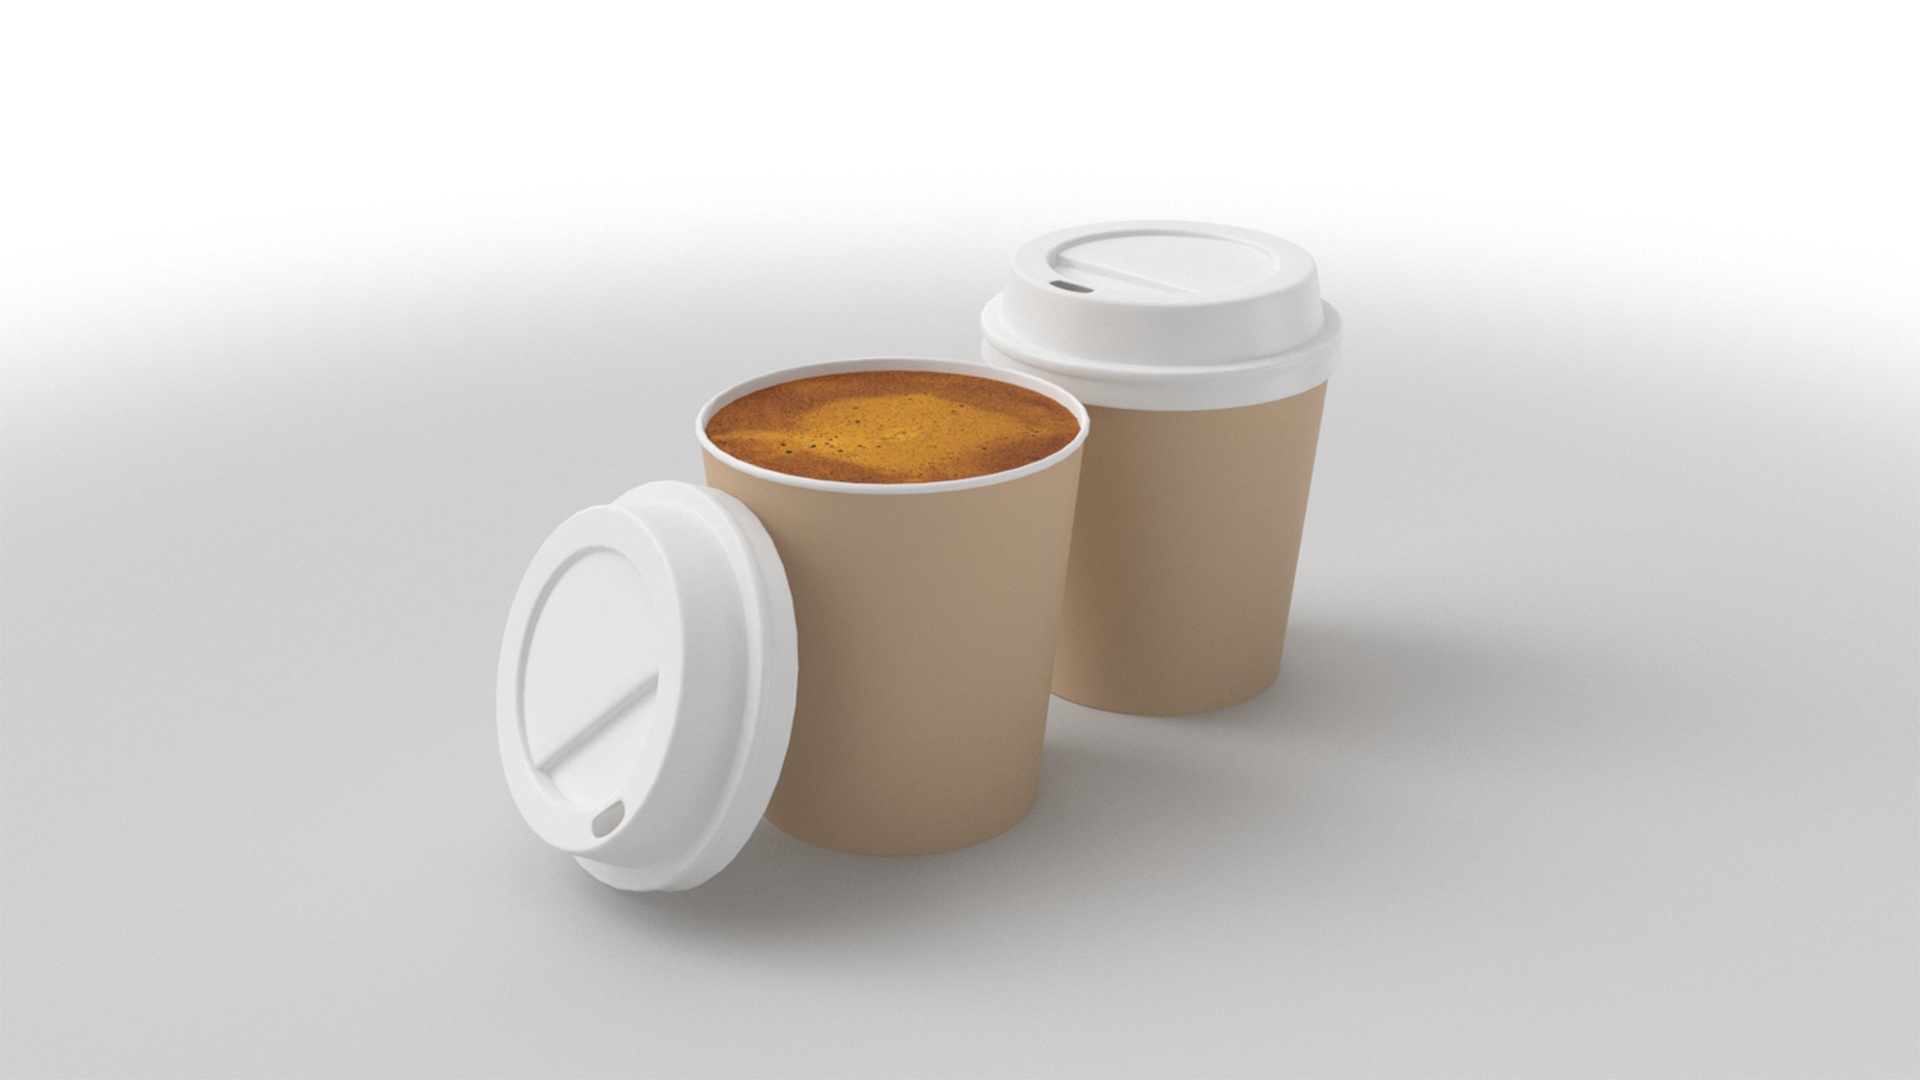 Coffee Cappuccino In Paper Cup For Take Away Stock Photo, Picture